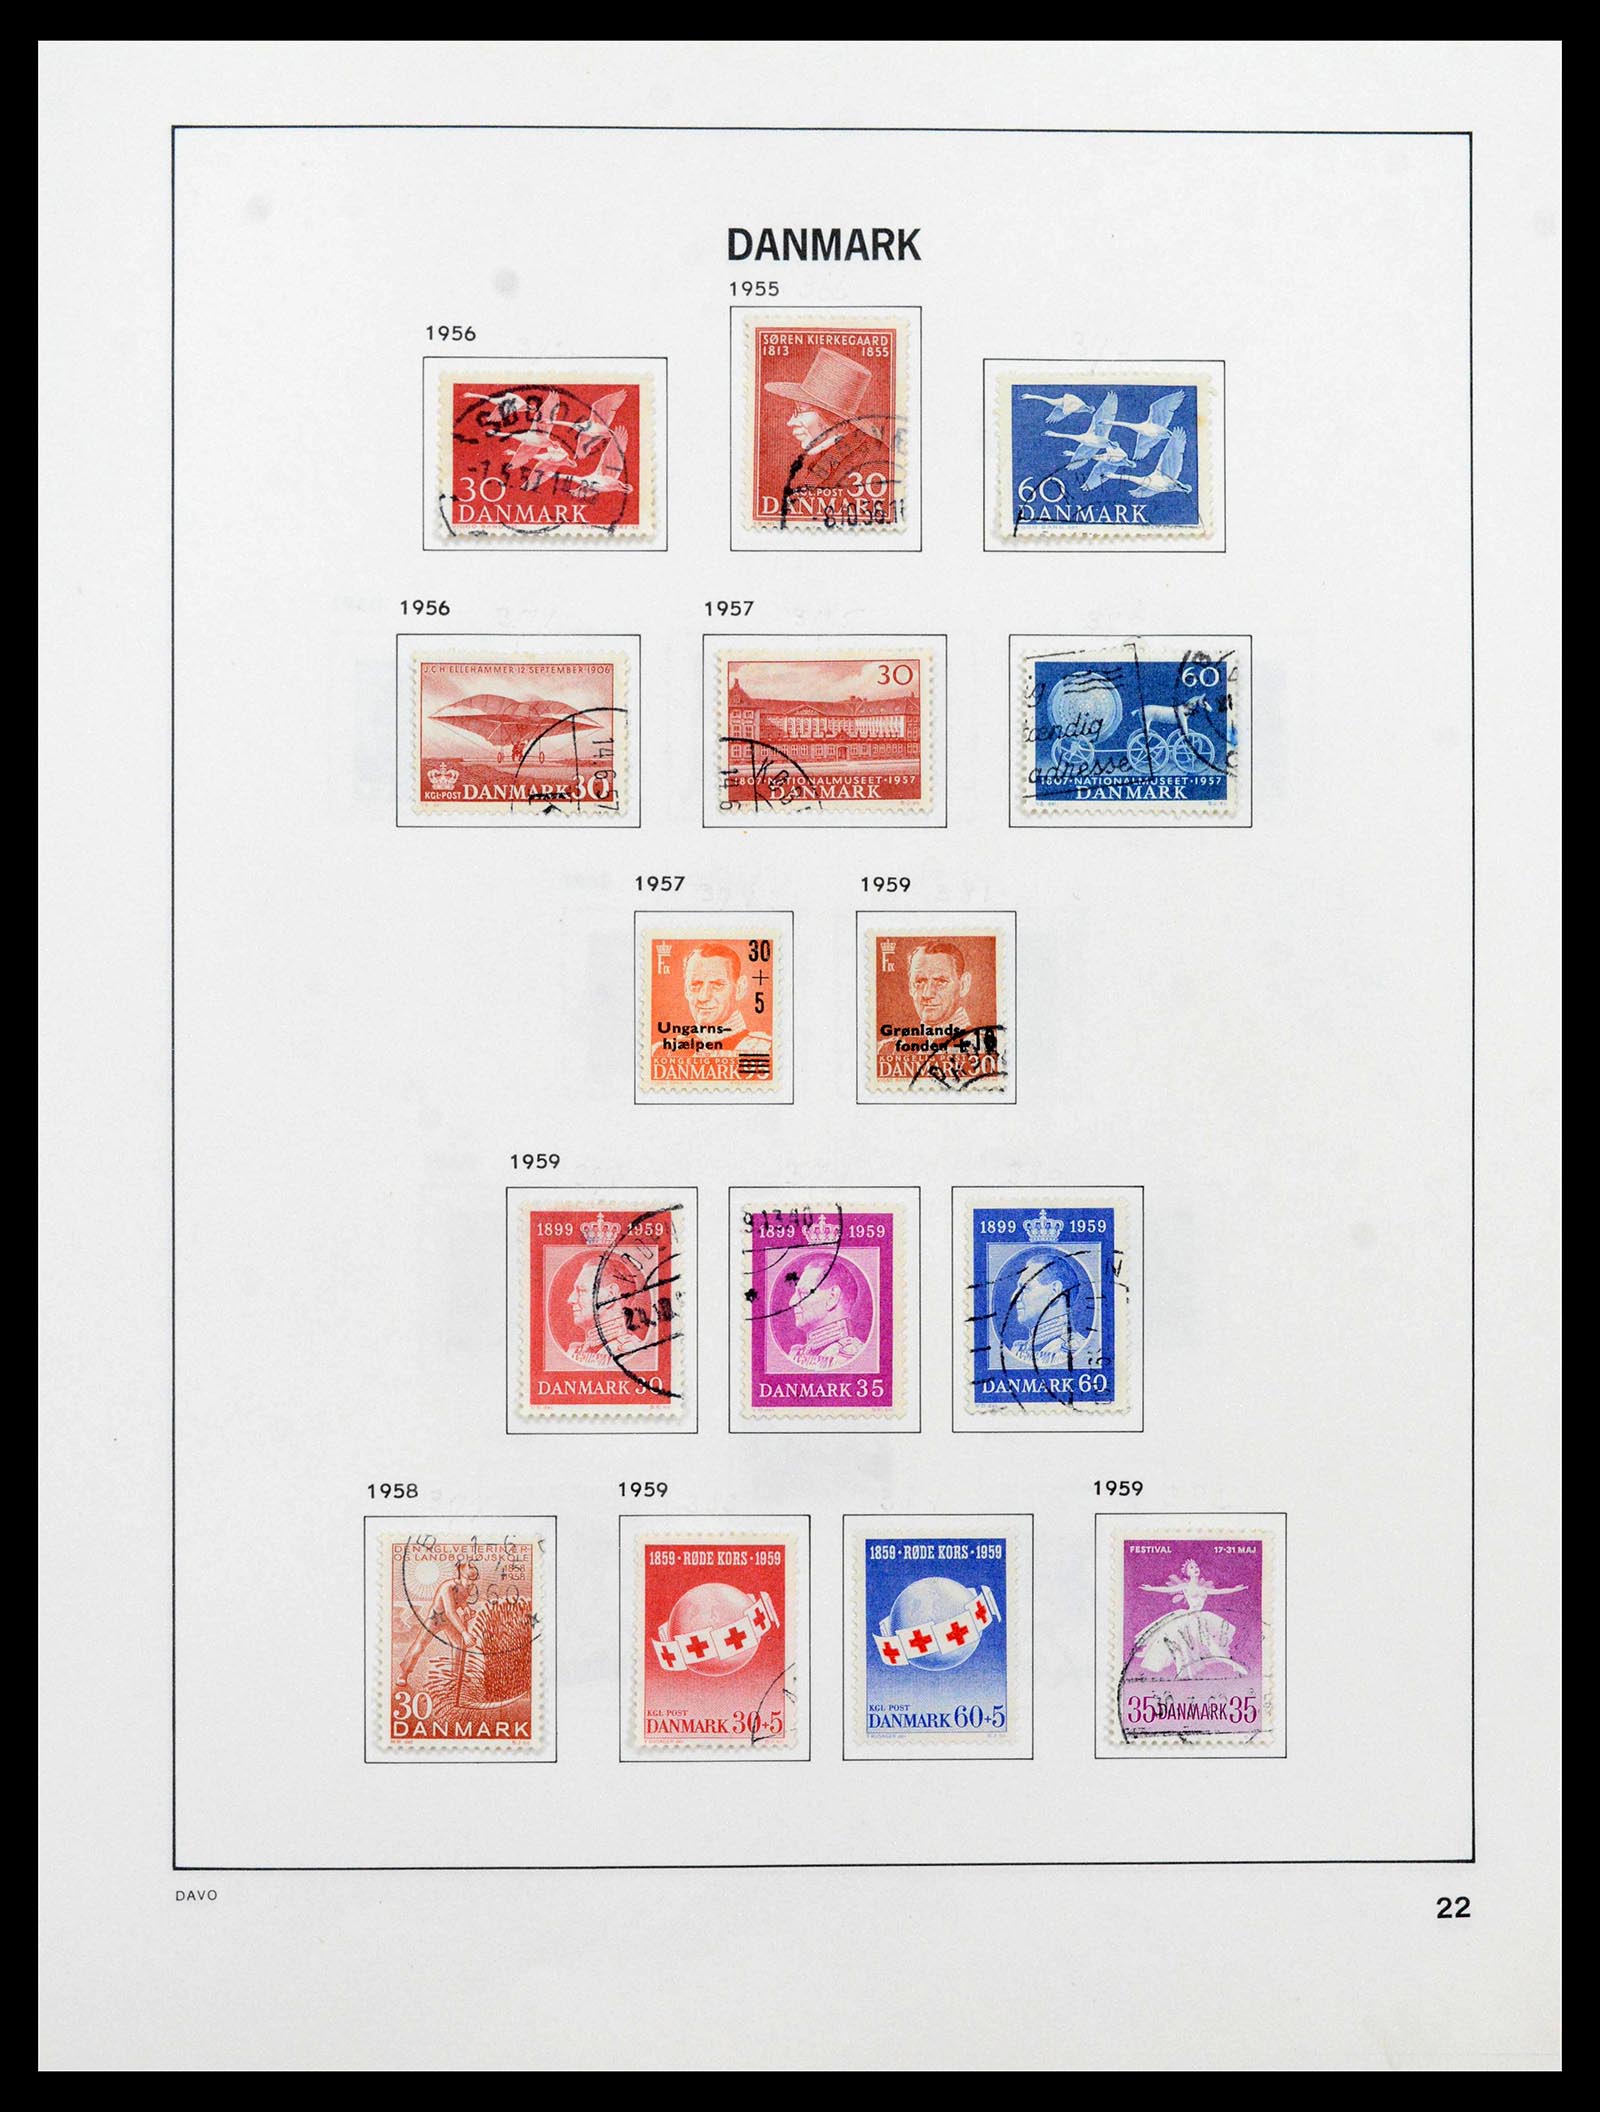 39428 0024 - Stamp collection 39428 Denmark 1851-2019.